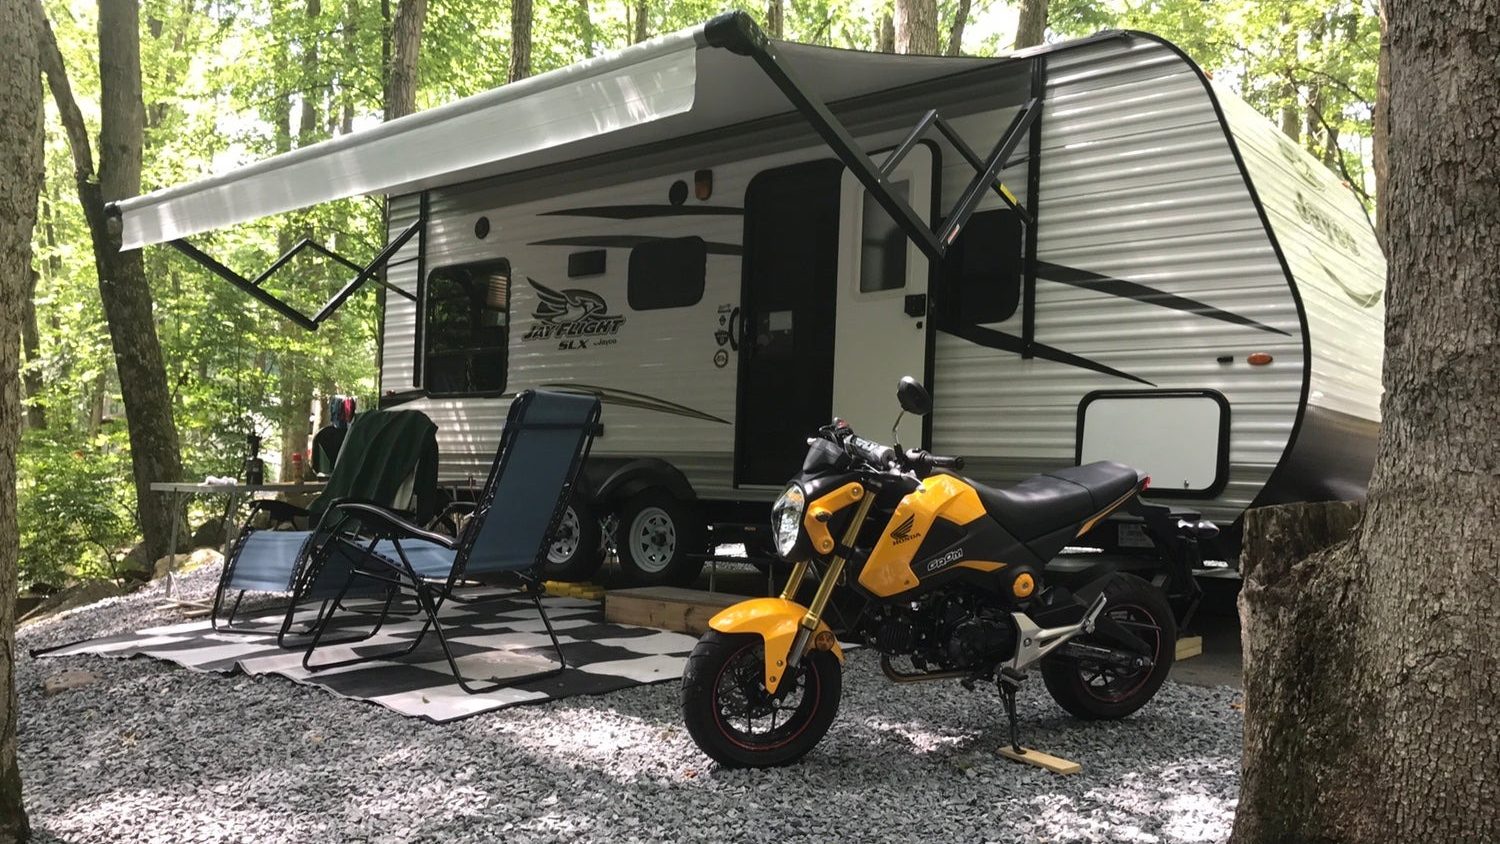 Exterior of Jay Flight with Chairs and a motorcycle in front of it. In a wooded campsite.